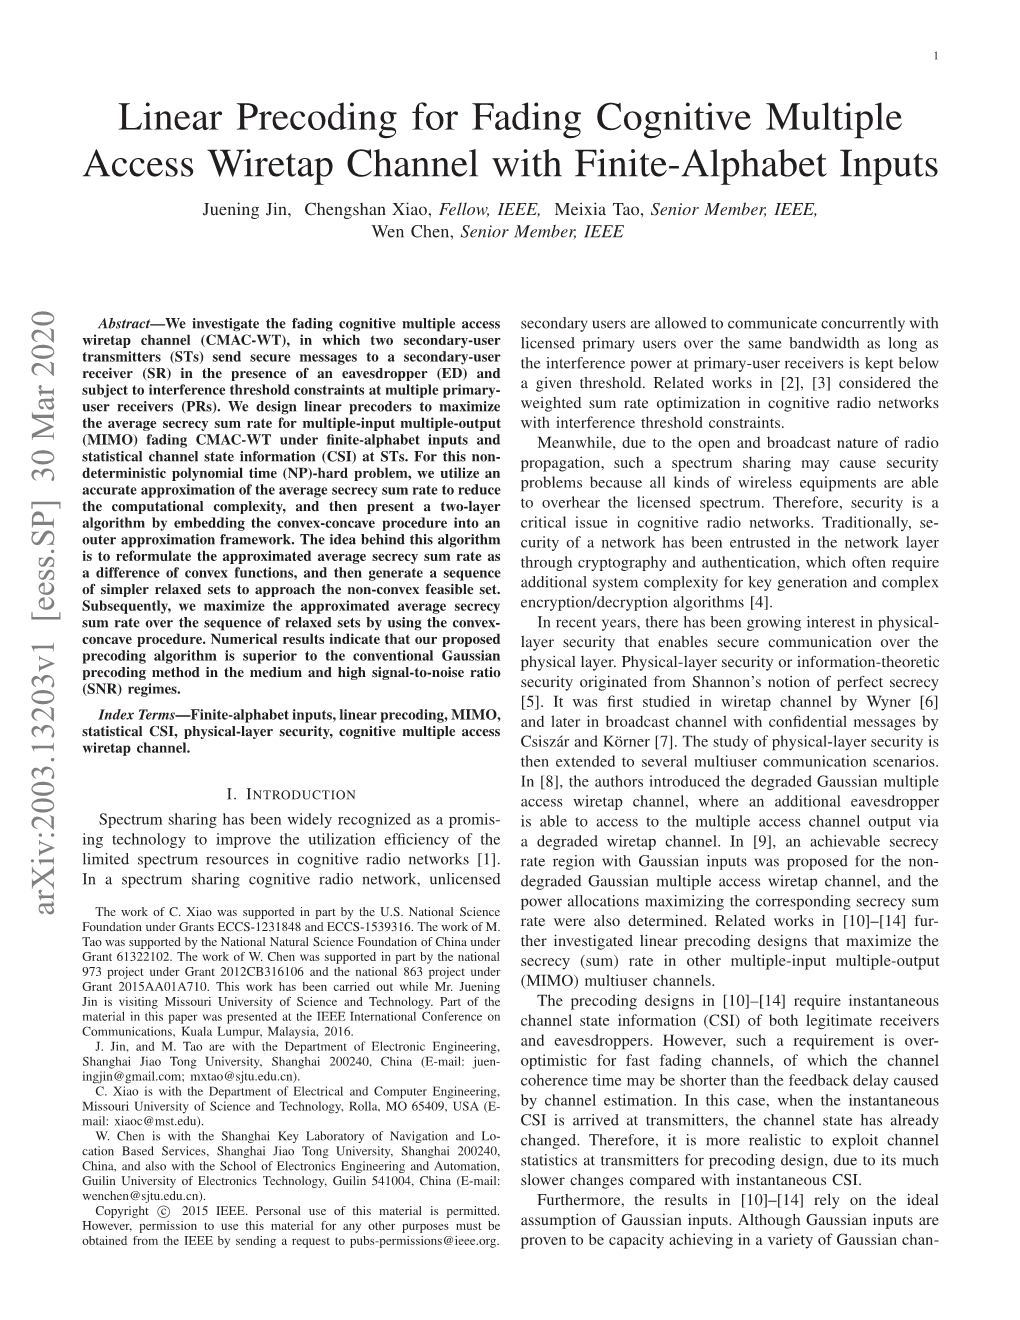 Linear Precoding for Fading Cognitive Multiple Access Wiretap Channel with Finite-Alphabet Inputs